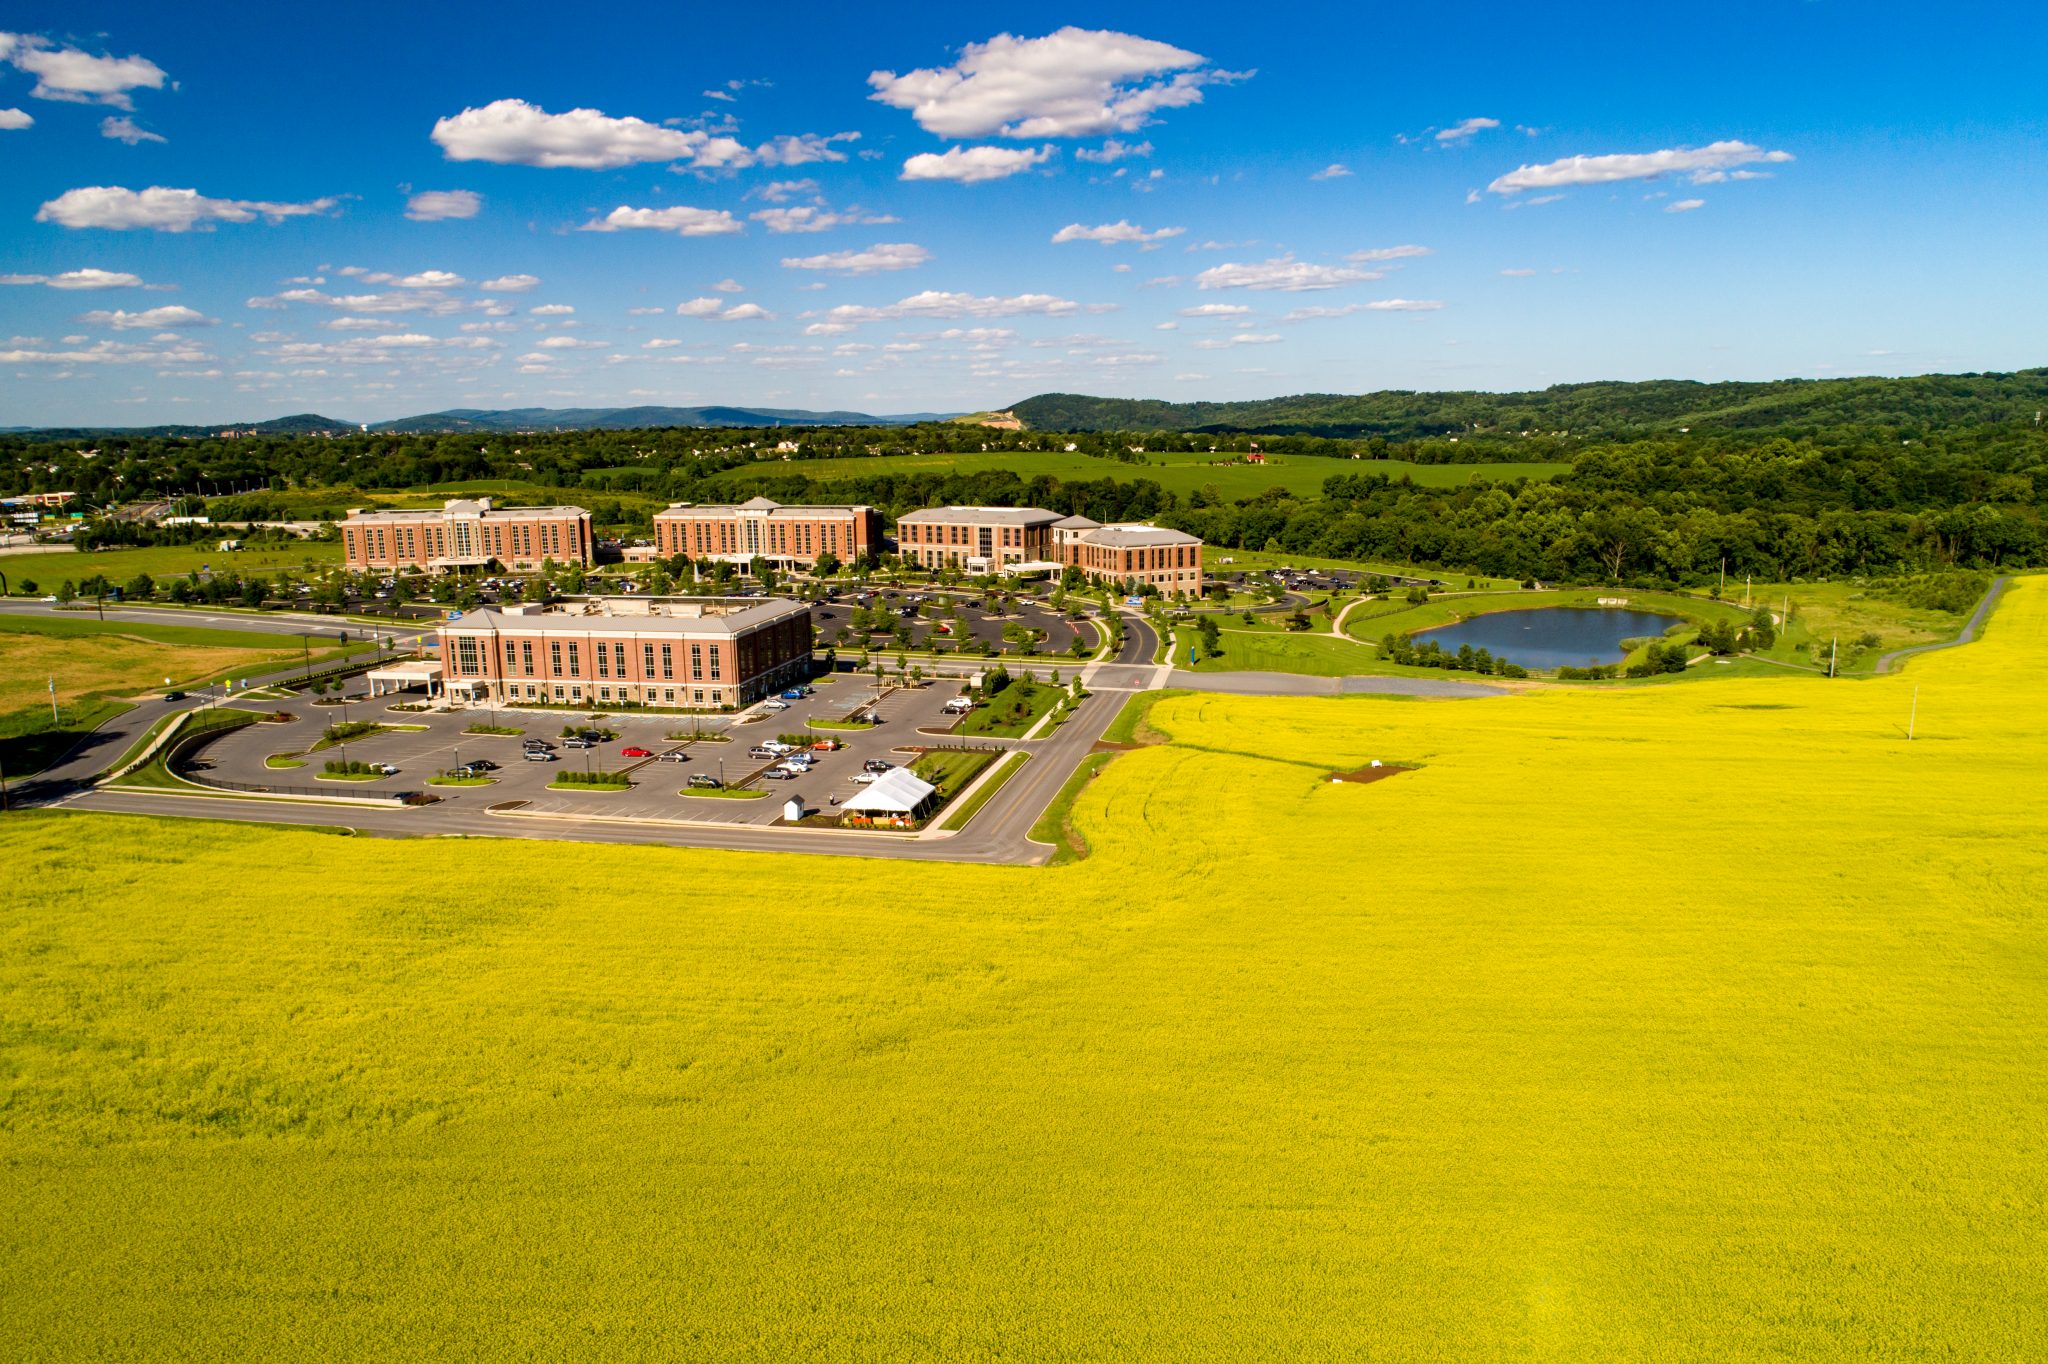 Canola Field Promotes WellBeing at St. Luke's Anderson Campus Saucon